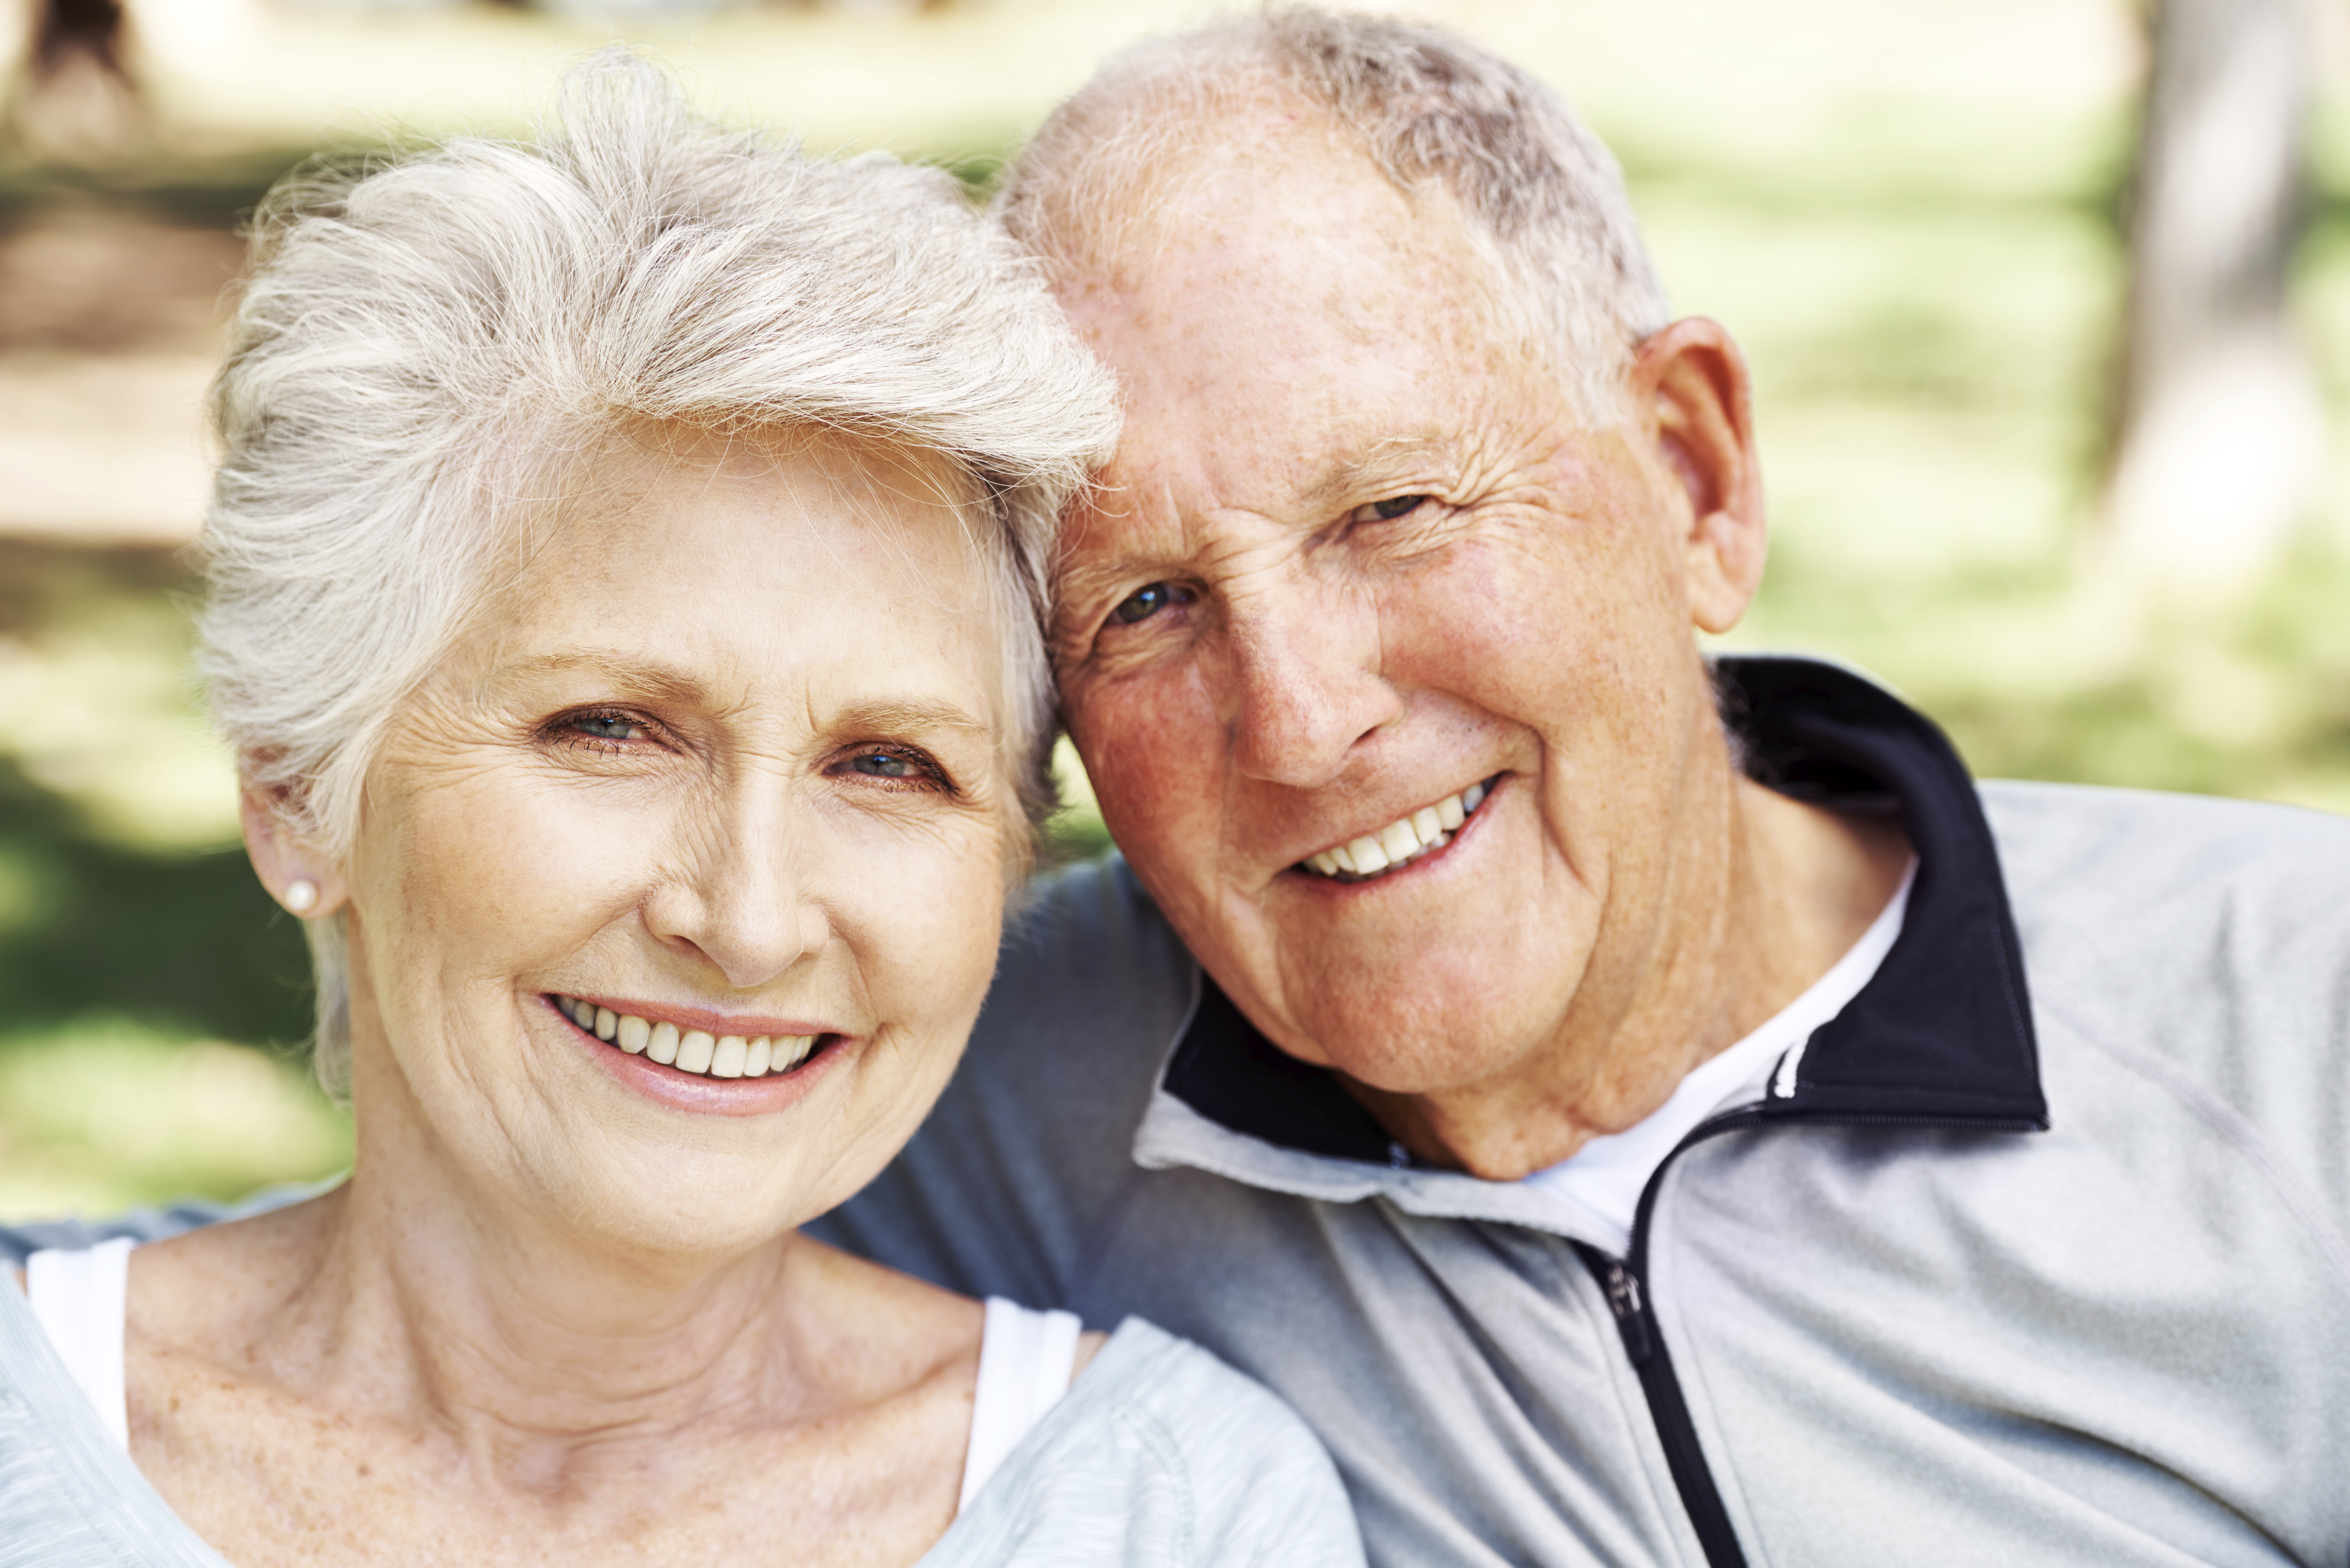 At Fulmer, we work with insurers to provide the best senior dental care.